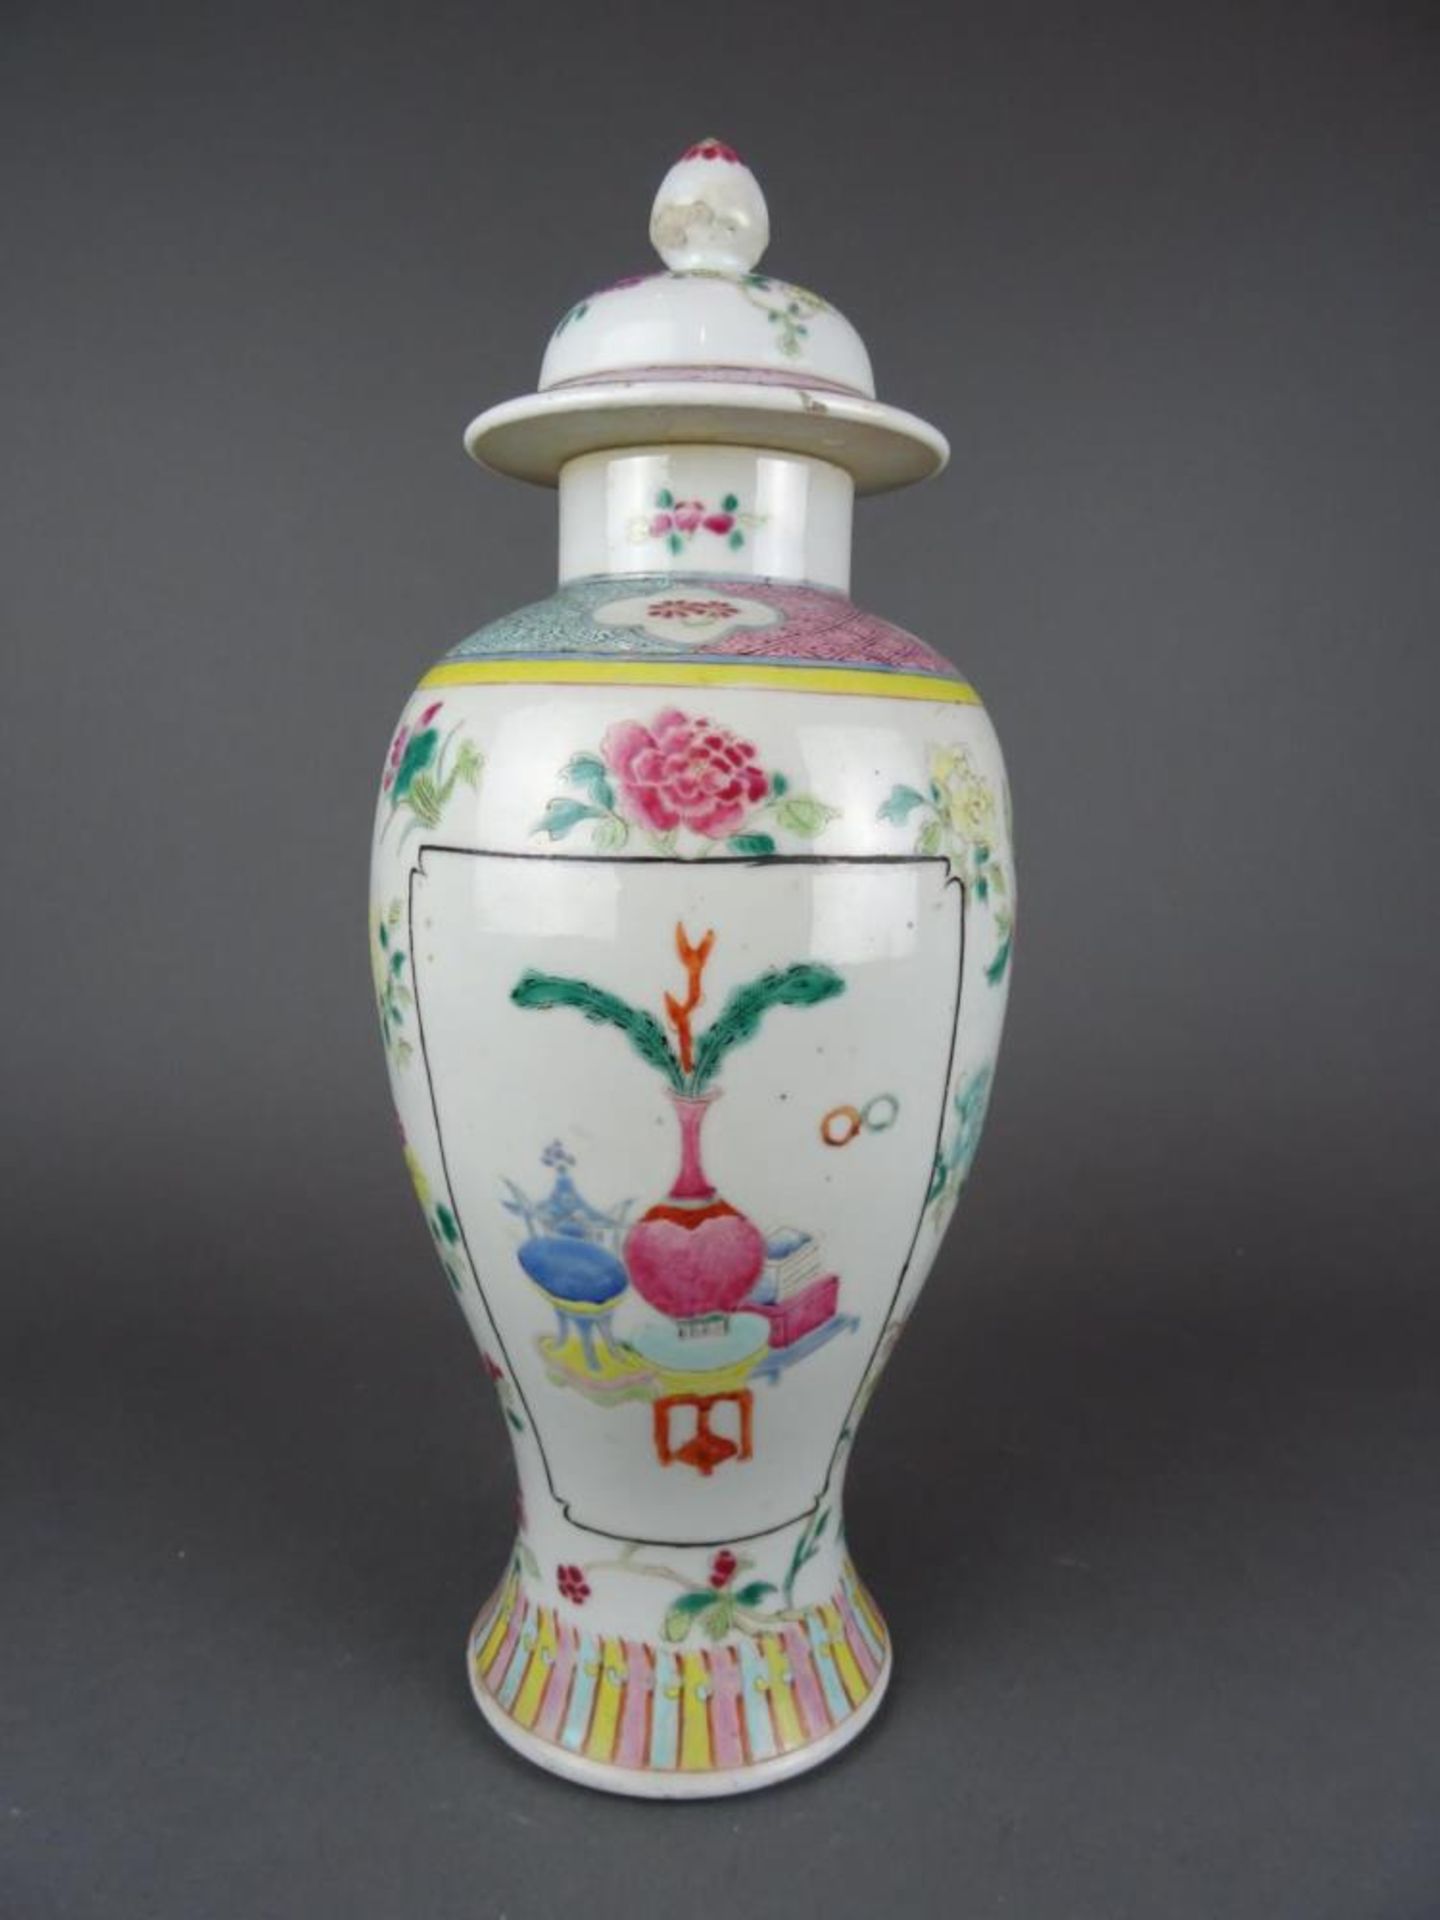 Chinese porcelain Famille rose vase with flowers - Image 3 of 6